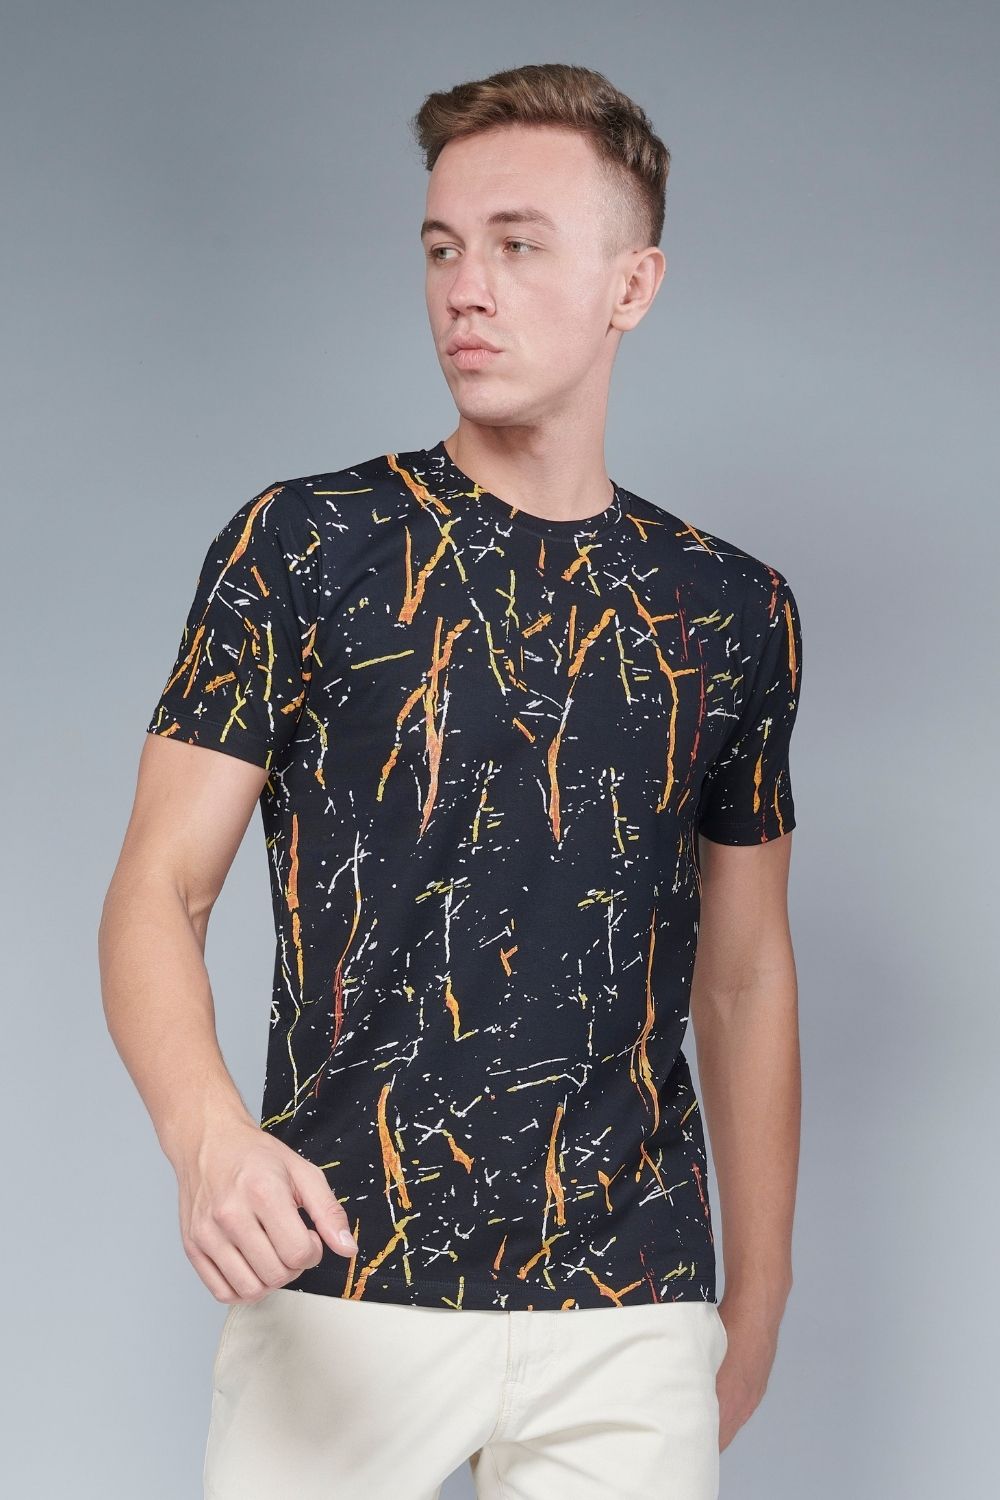 Black color, sprinkle patterned all over print T shirt for men with half sleeves and round neck, front view.